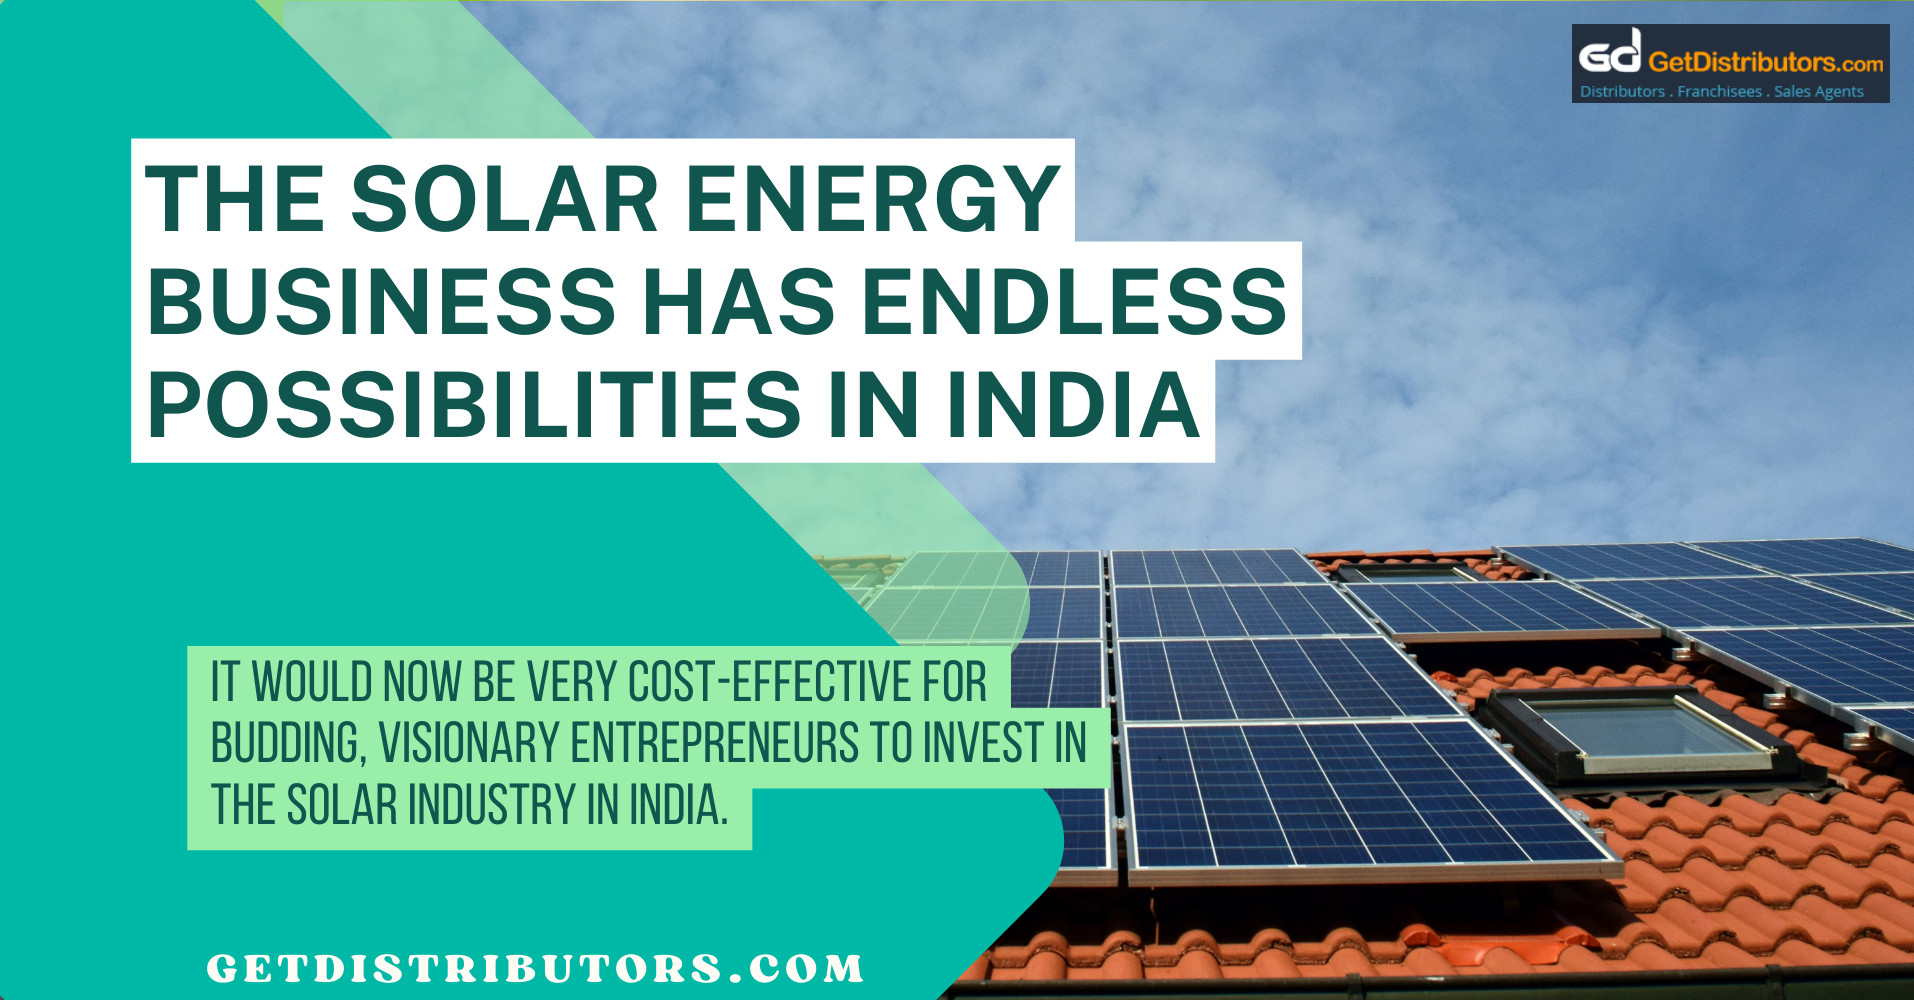 The solar energy business has endless possibilities In India